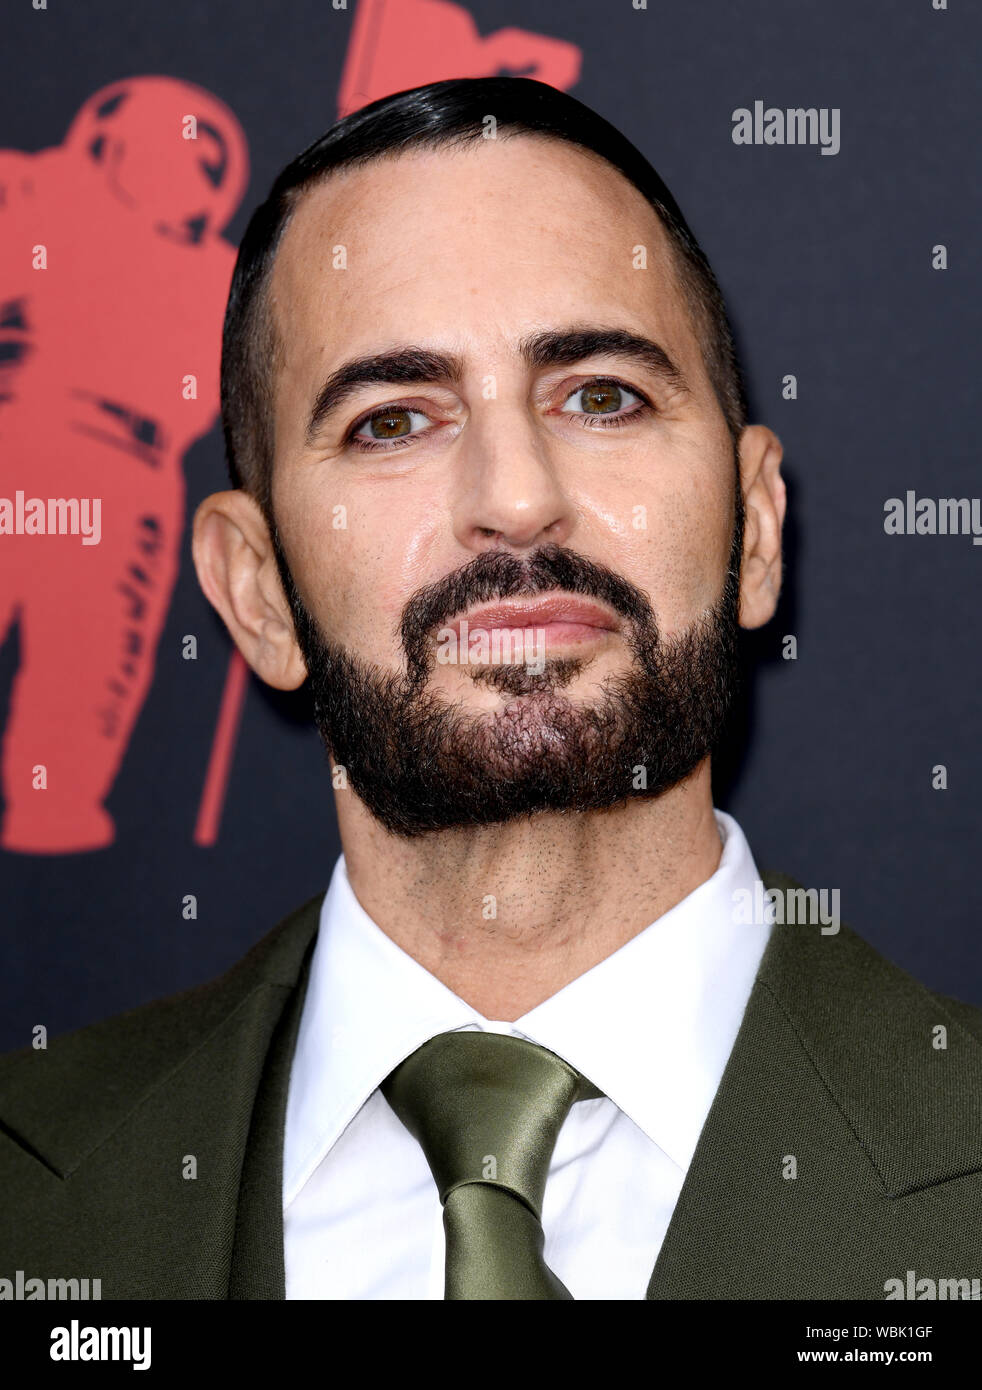 Marc jacobs store hi-res stock photography and images - Alamy